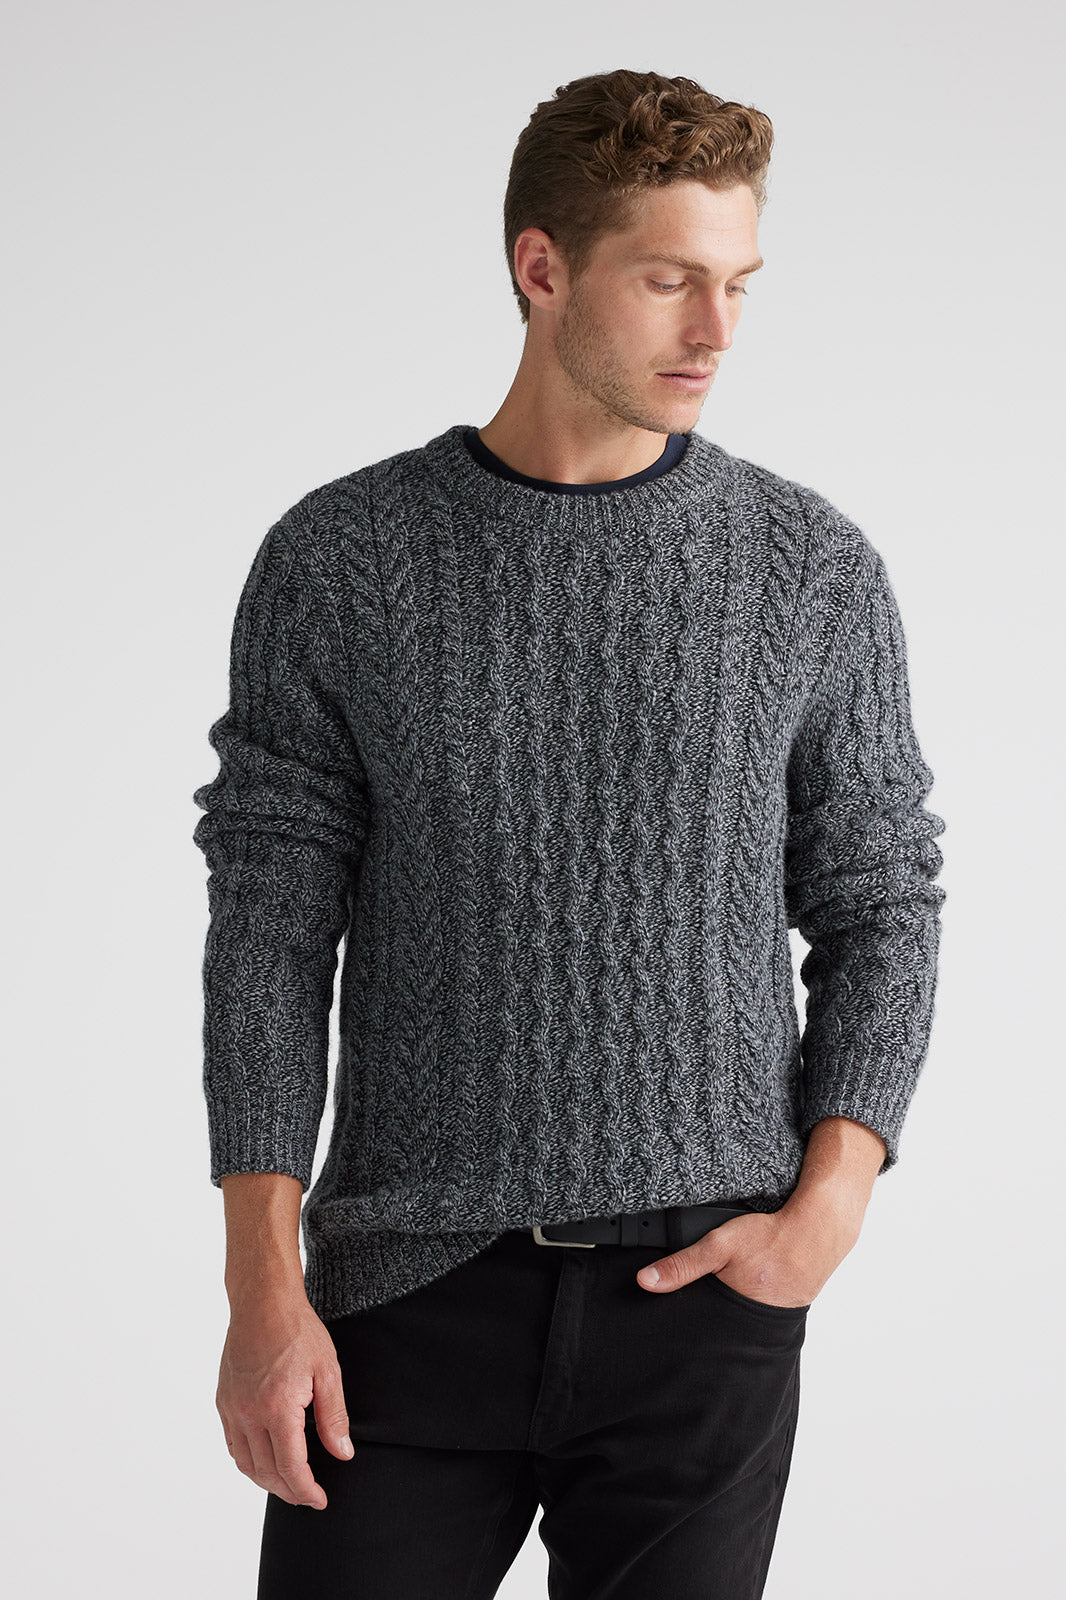 TOORALLIE HONEYCOMB CABLE JUMPER